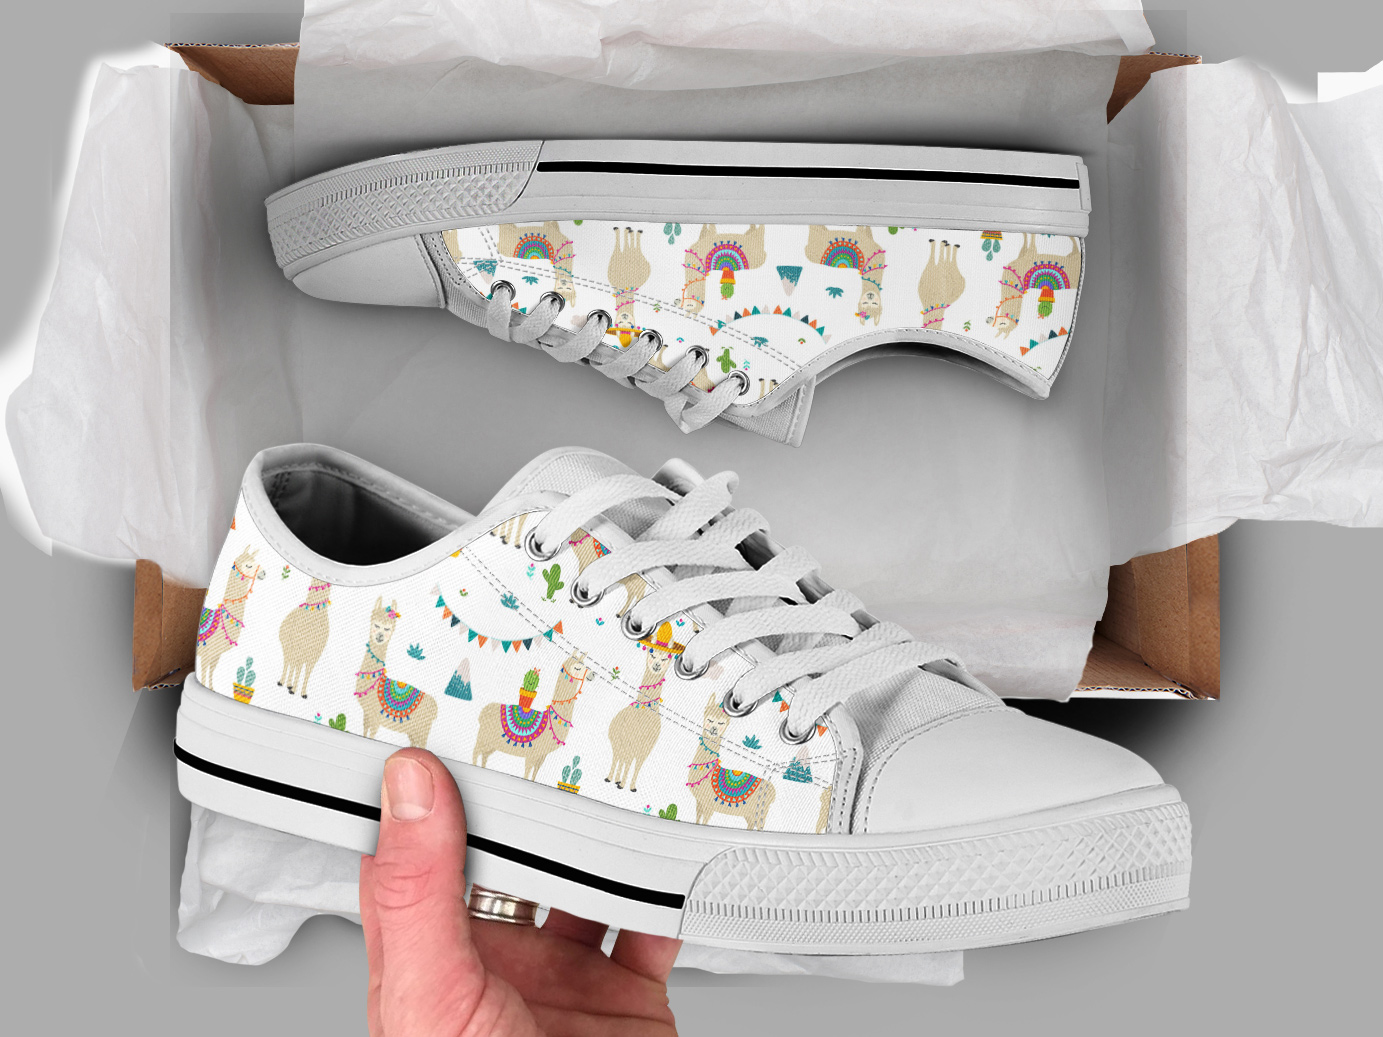 White Llama Shoes | Custom Low Tops Sneakers For Kids & Adults